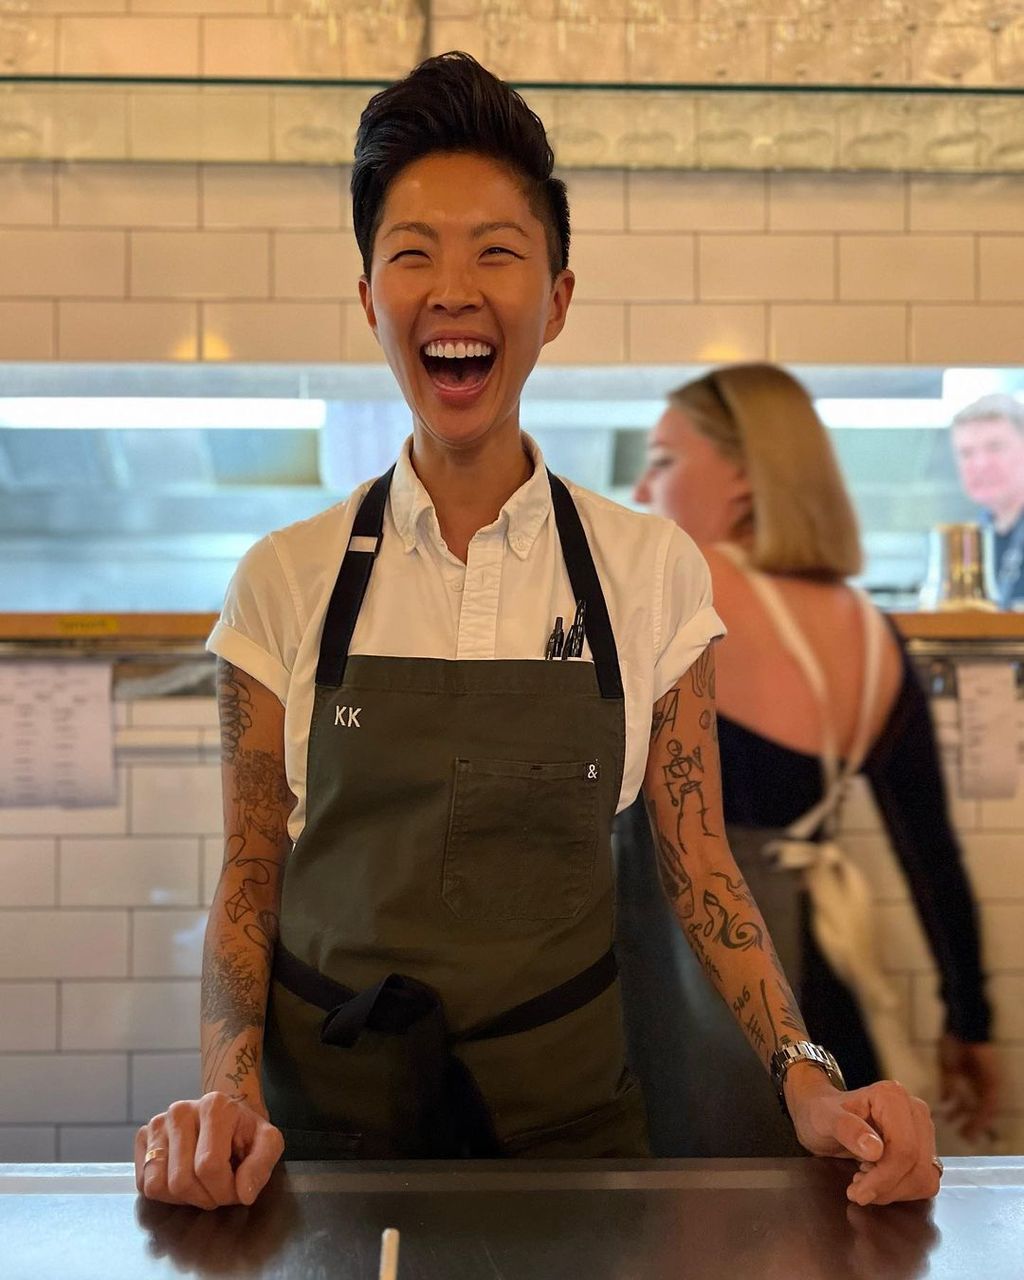 Kristen Kish joined Top Chef as new host